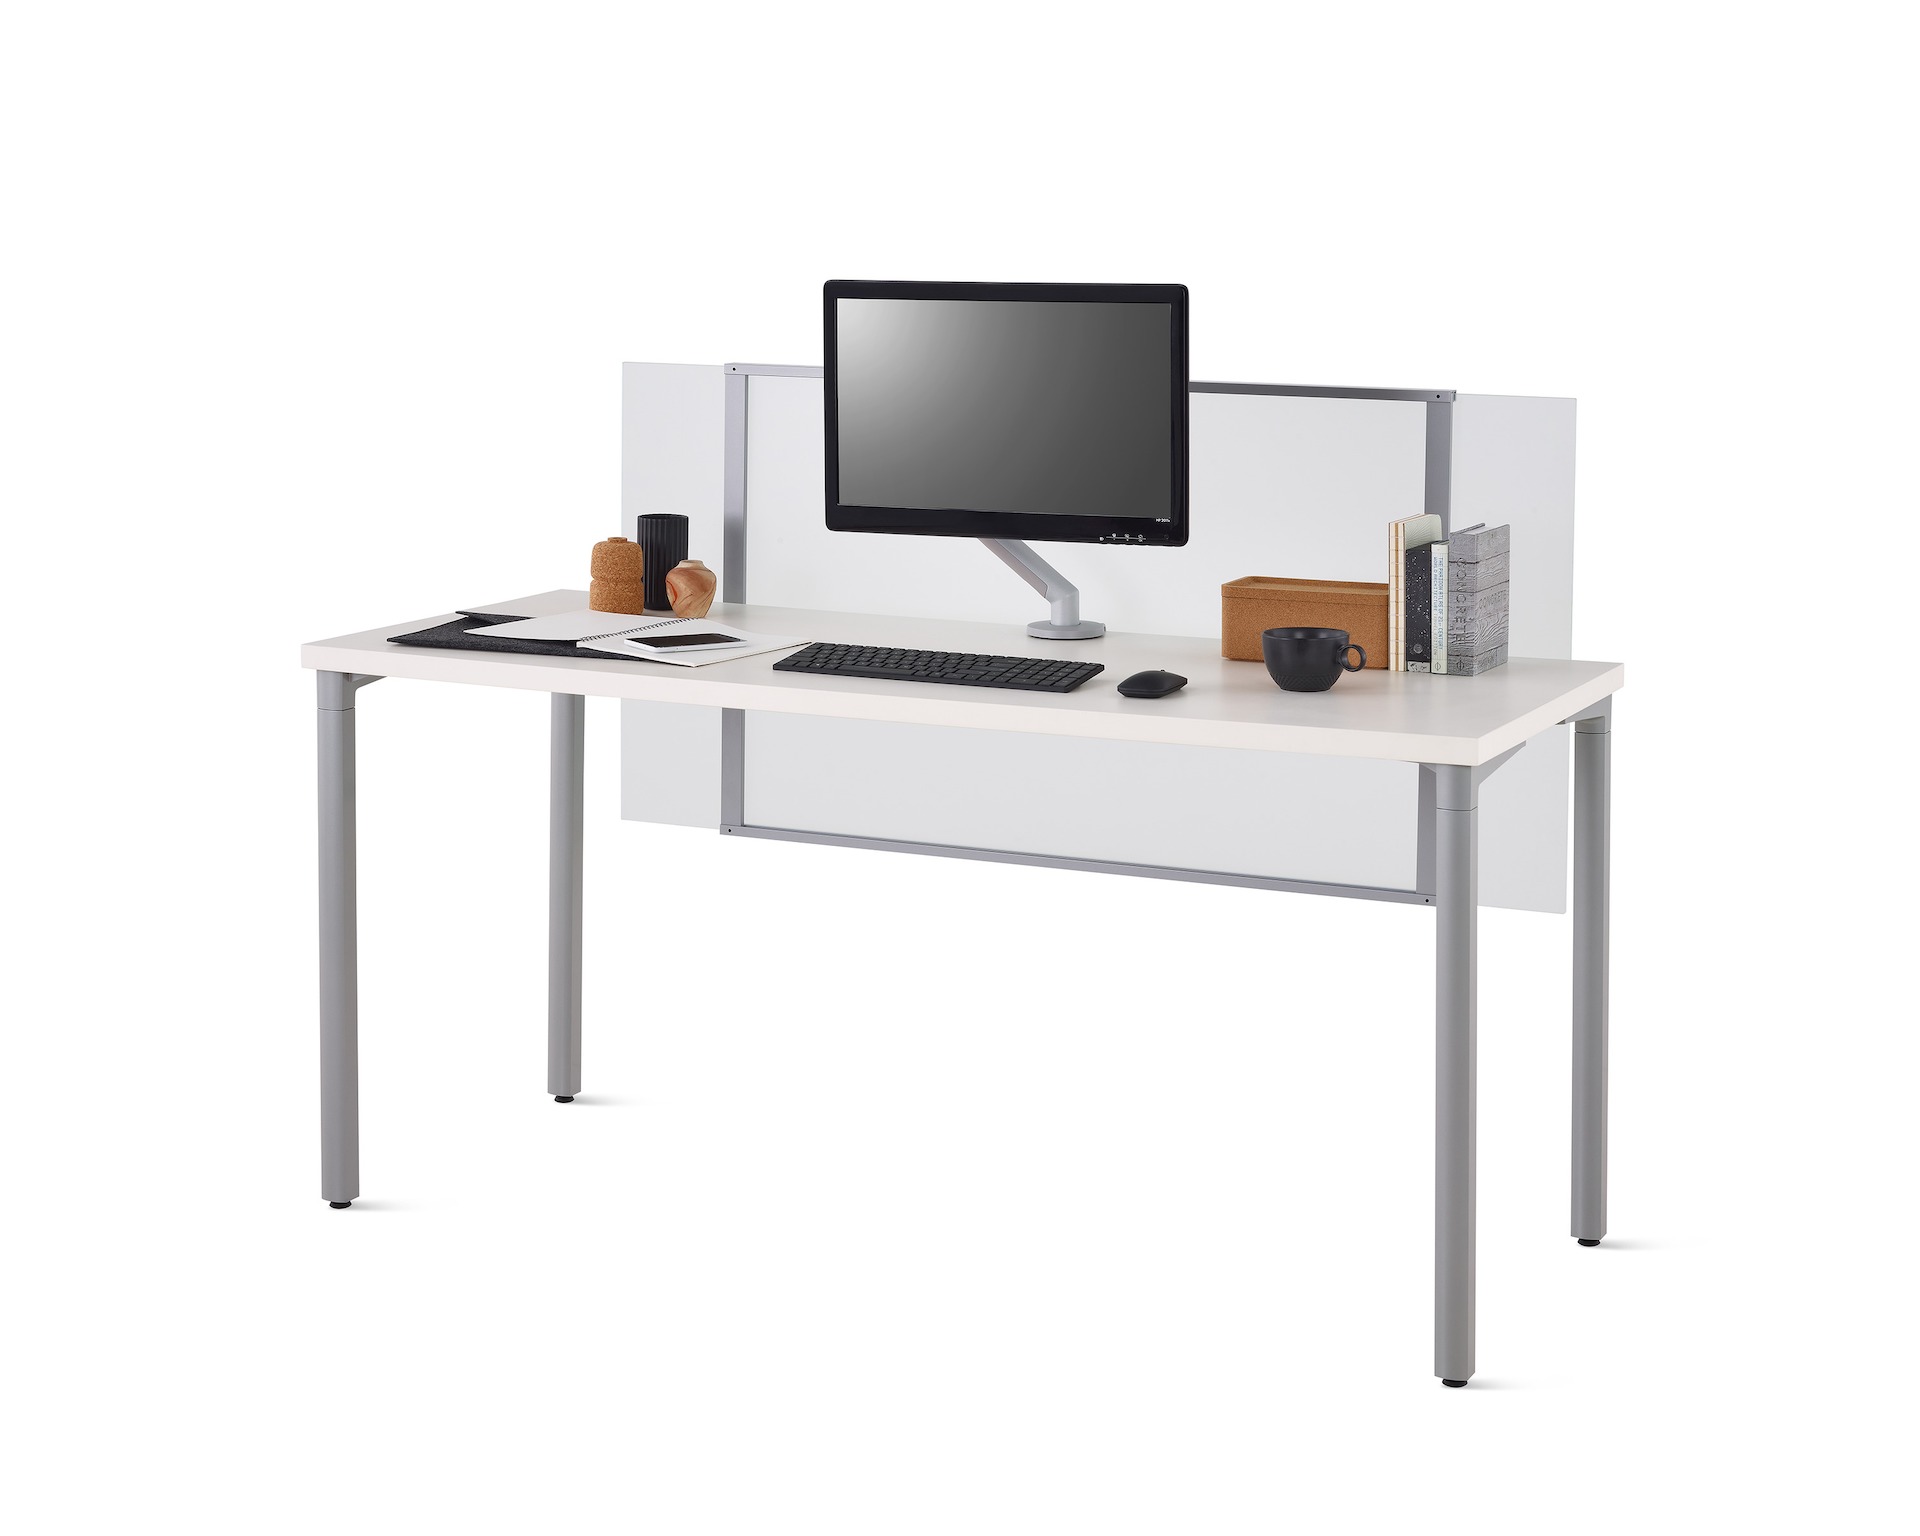 Viewed at an angle, a white Everywhere desk with a frosted glass surface-attached privacy screen, gray legs, and Flo monitor arm.